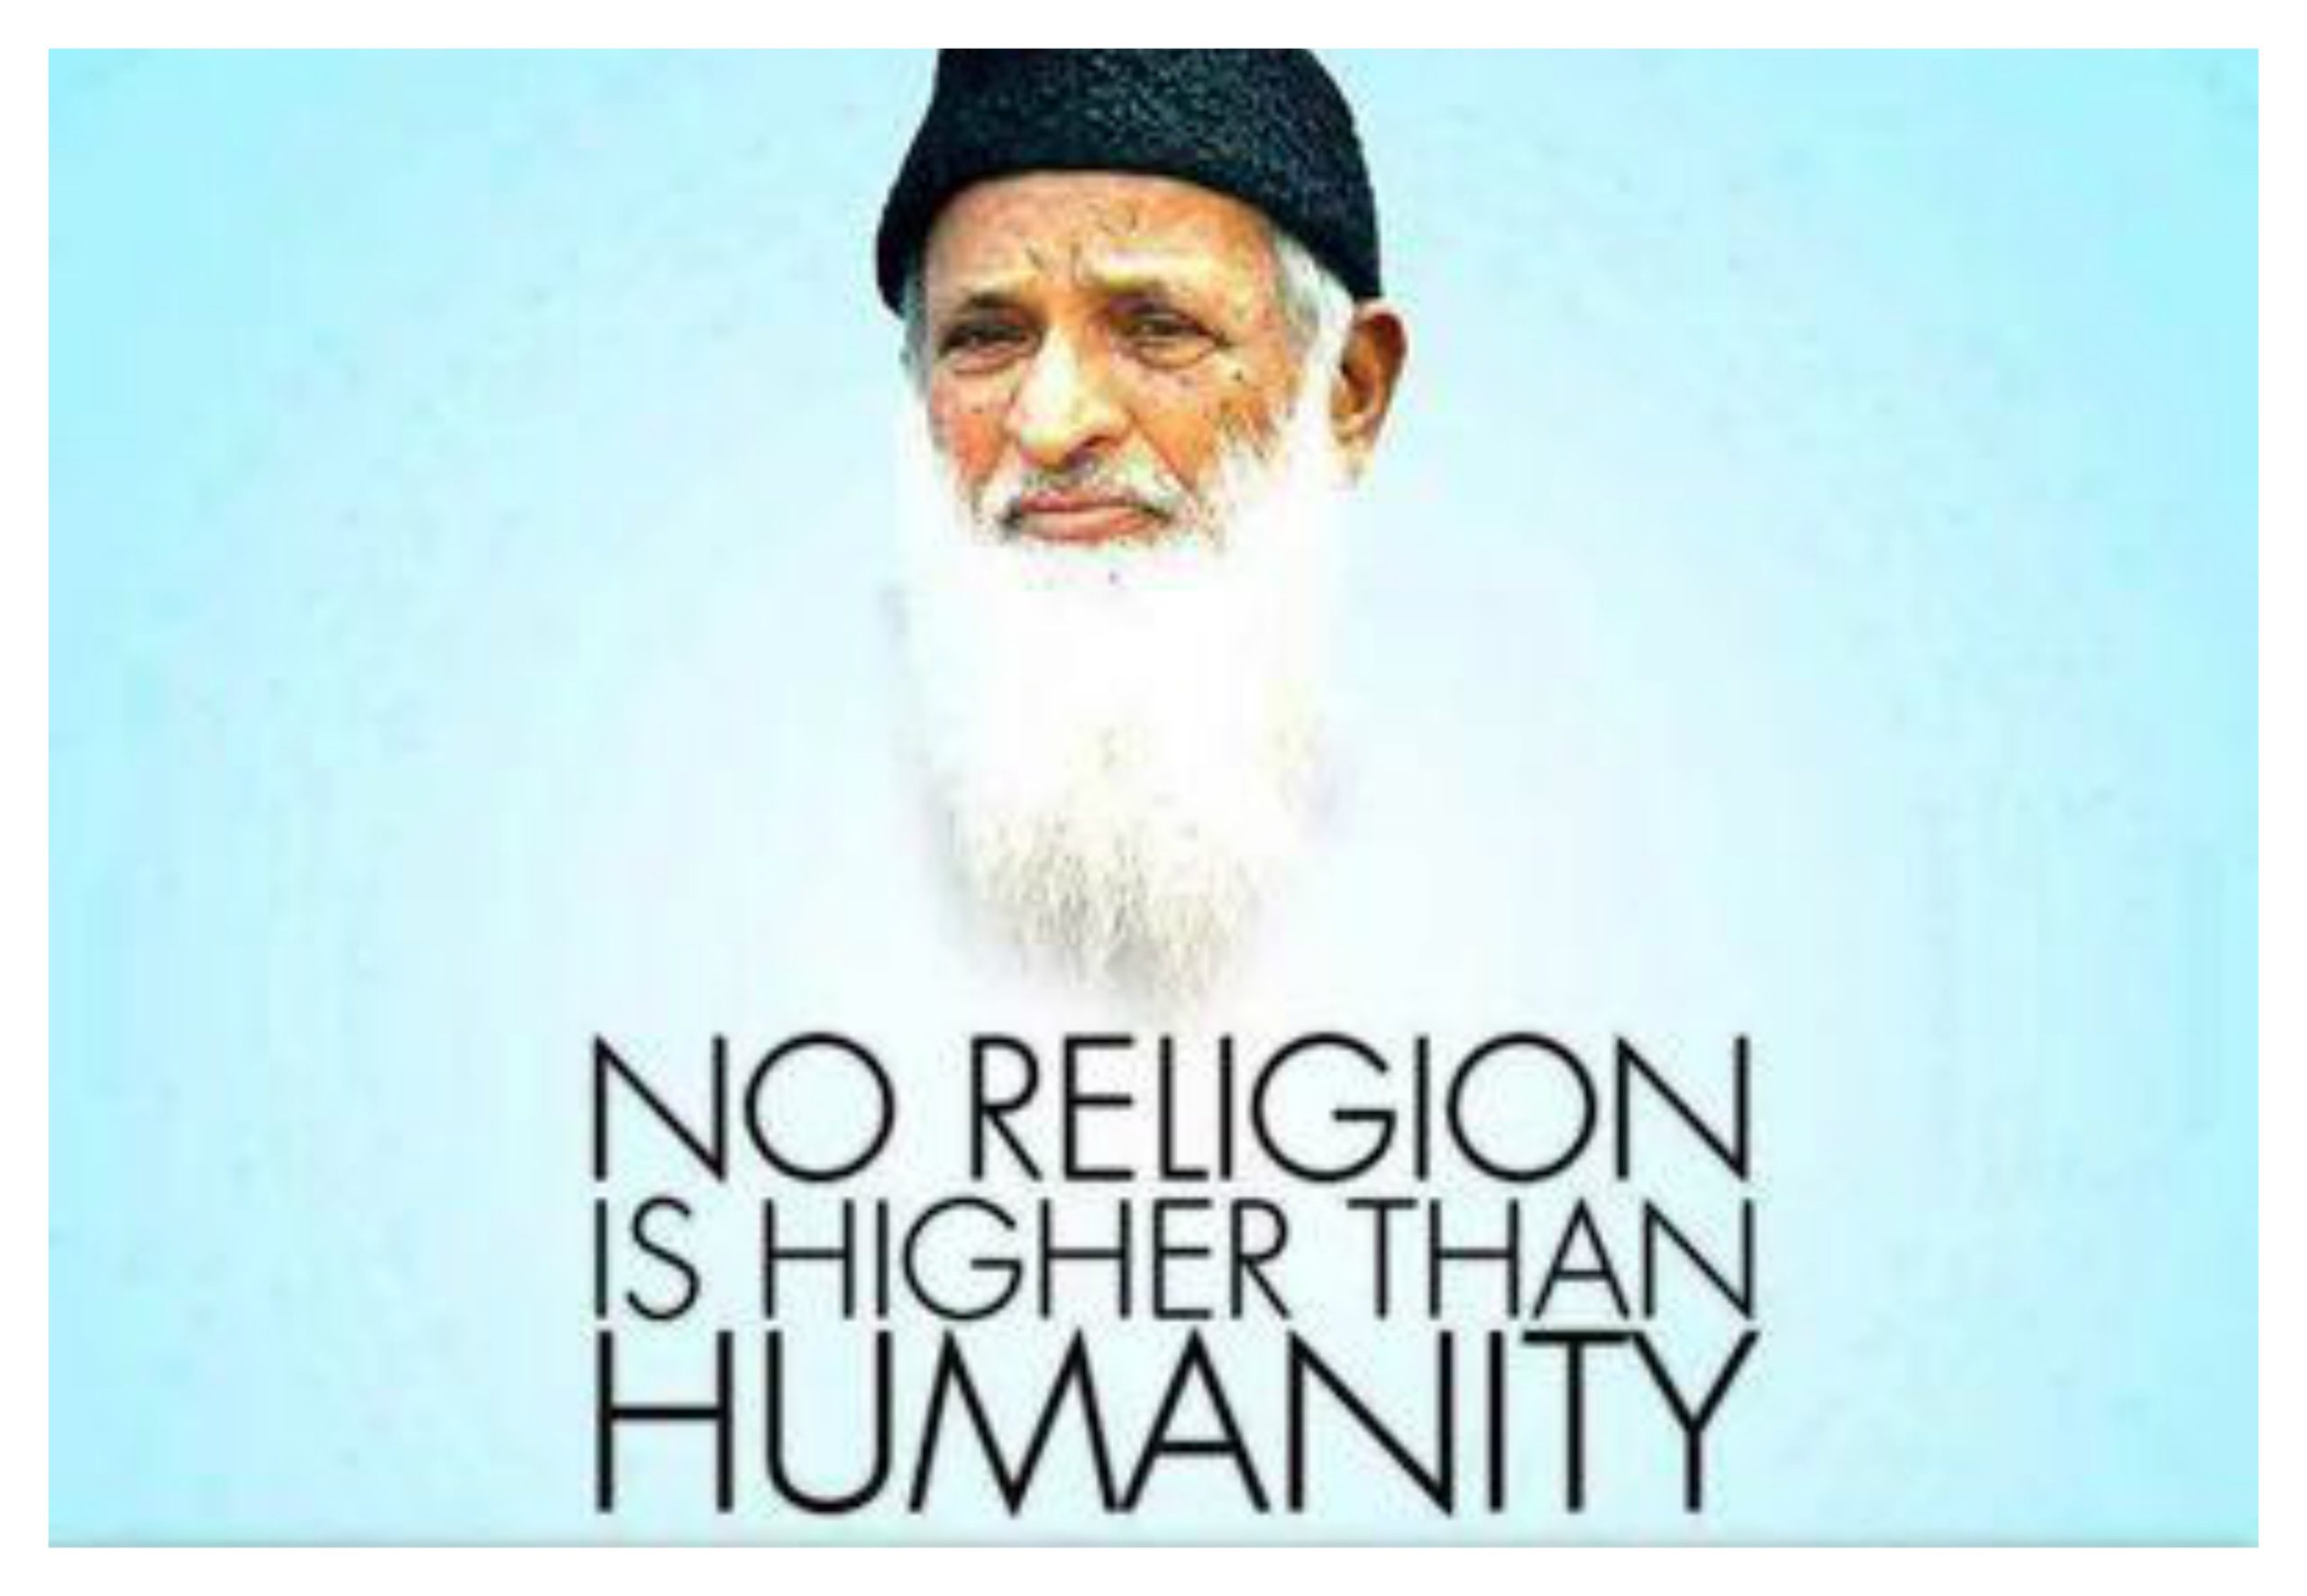 See how Twitter gather people to express their feelings for Sir Abdul Sattar Edhi's 89th Birthday.